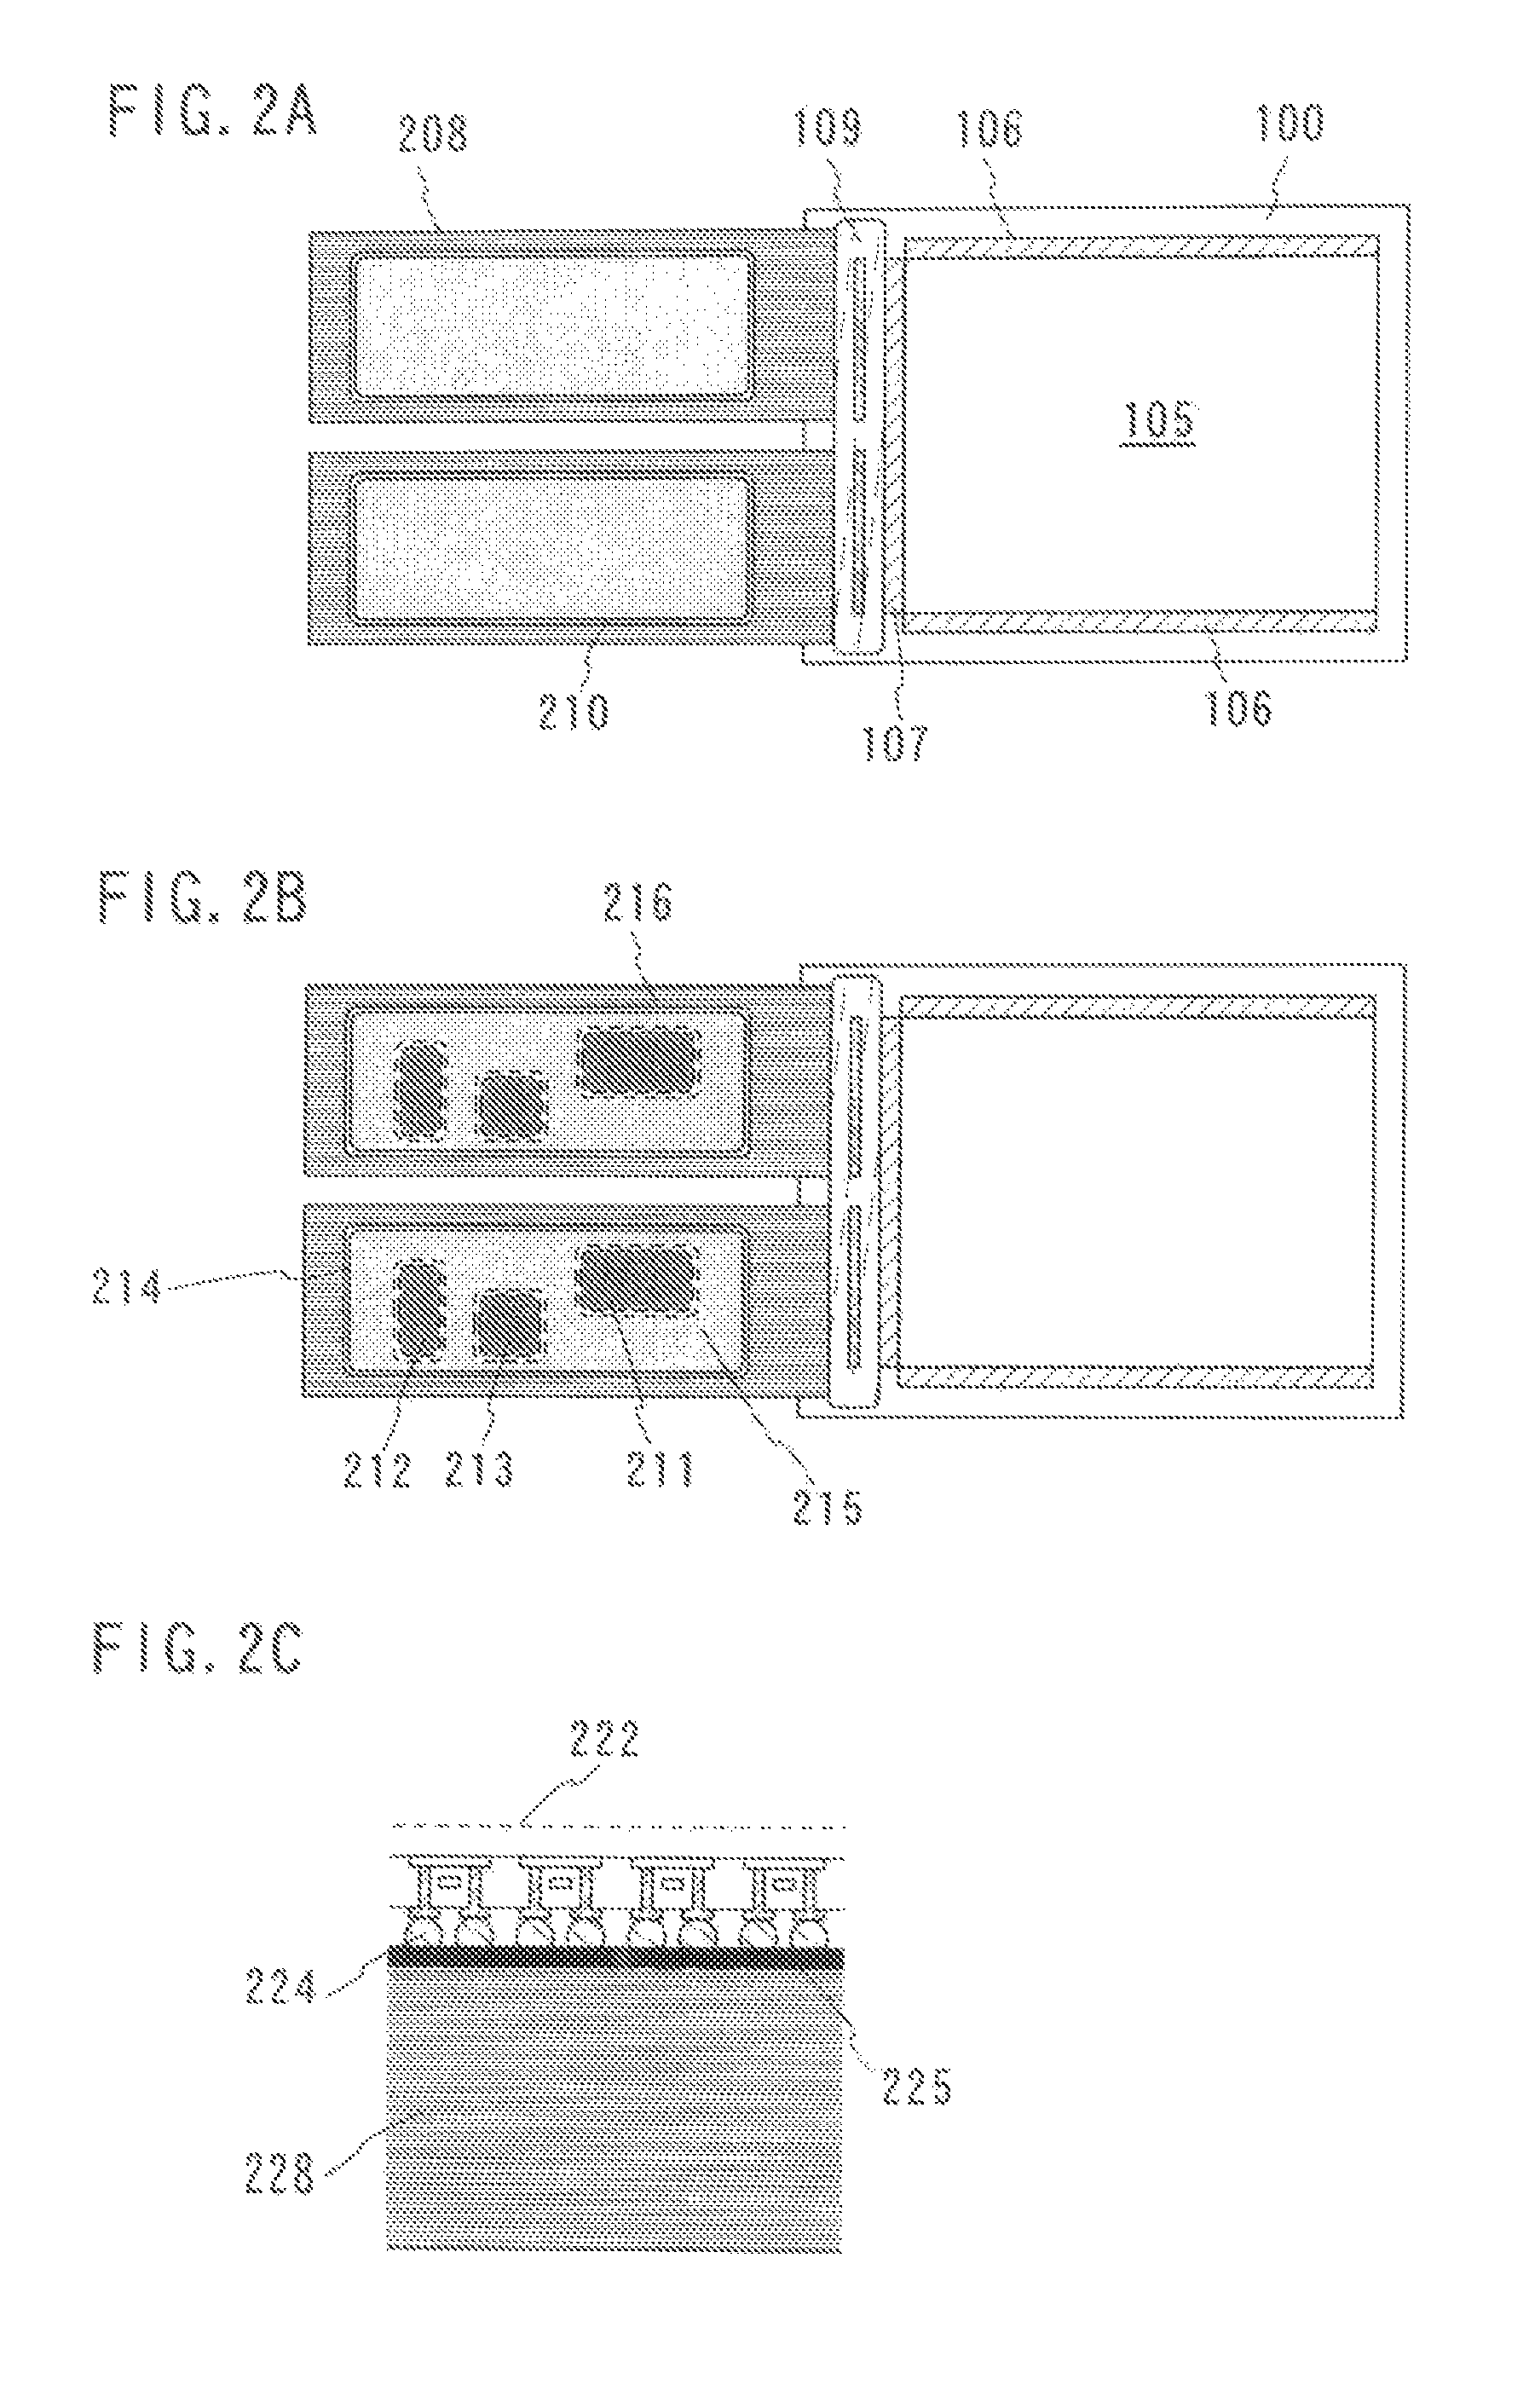 Semiconductor device having a flexible printed circuit